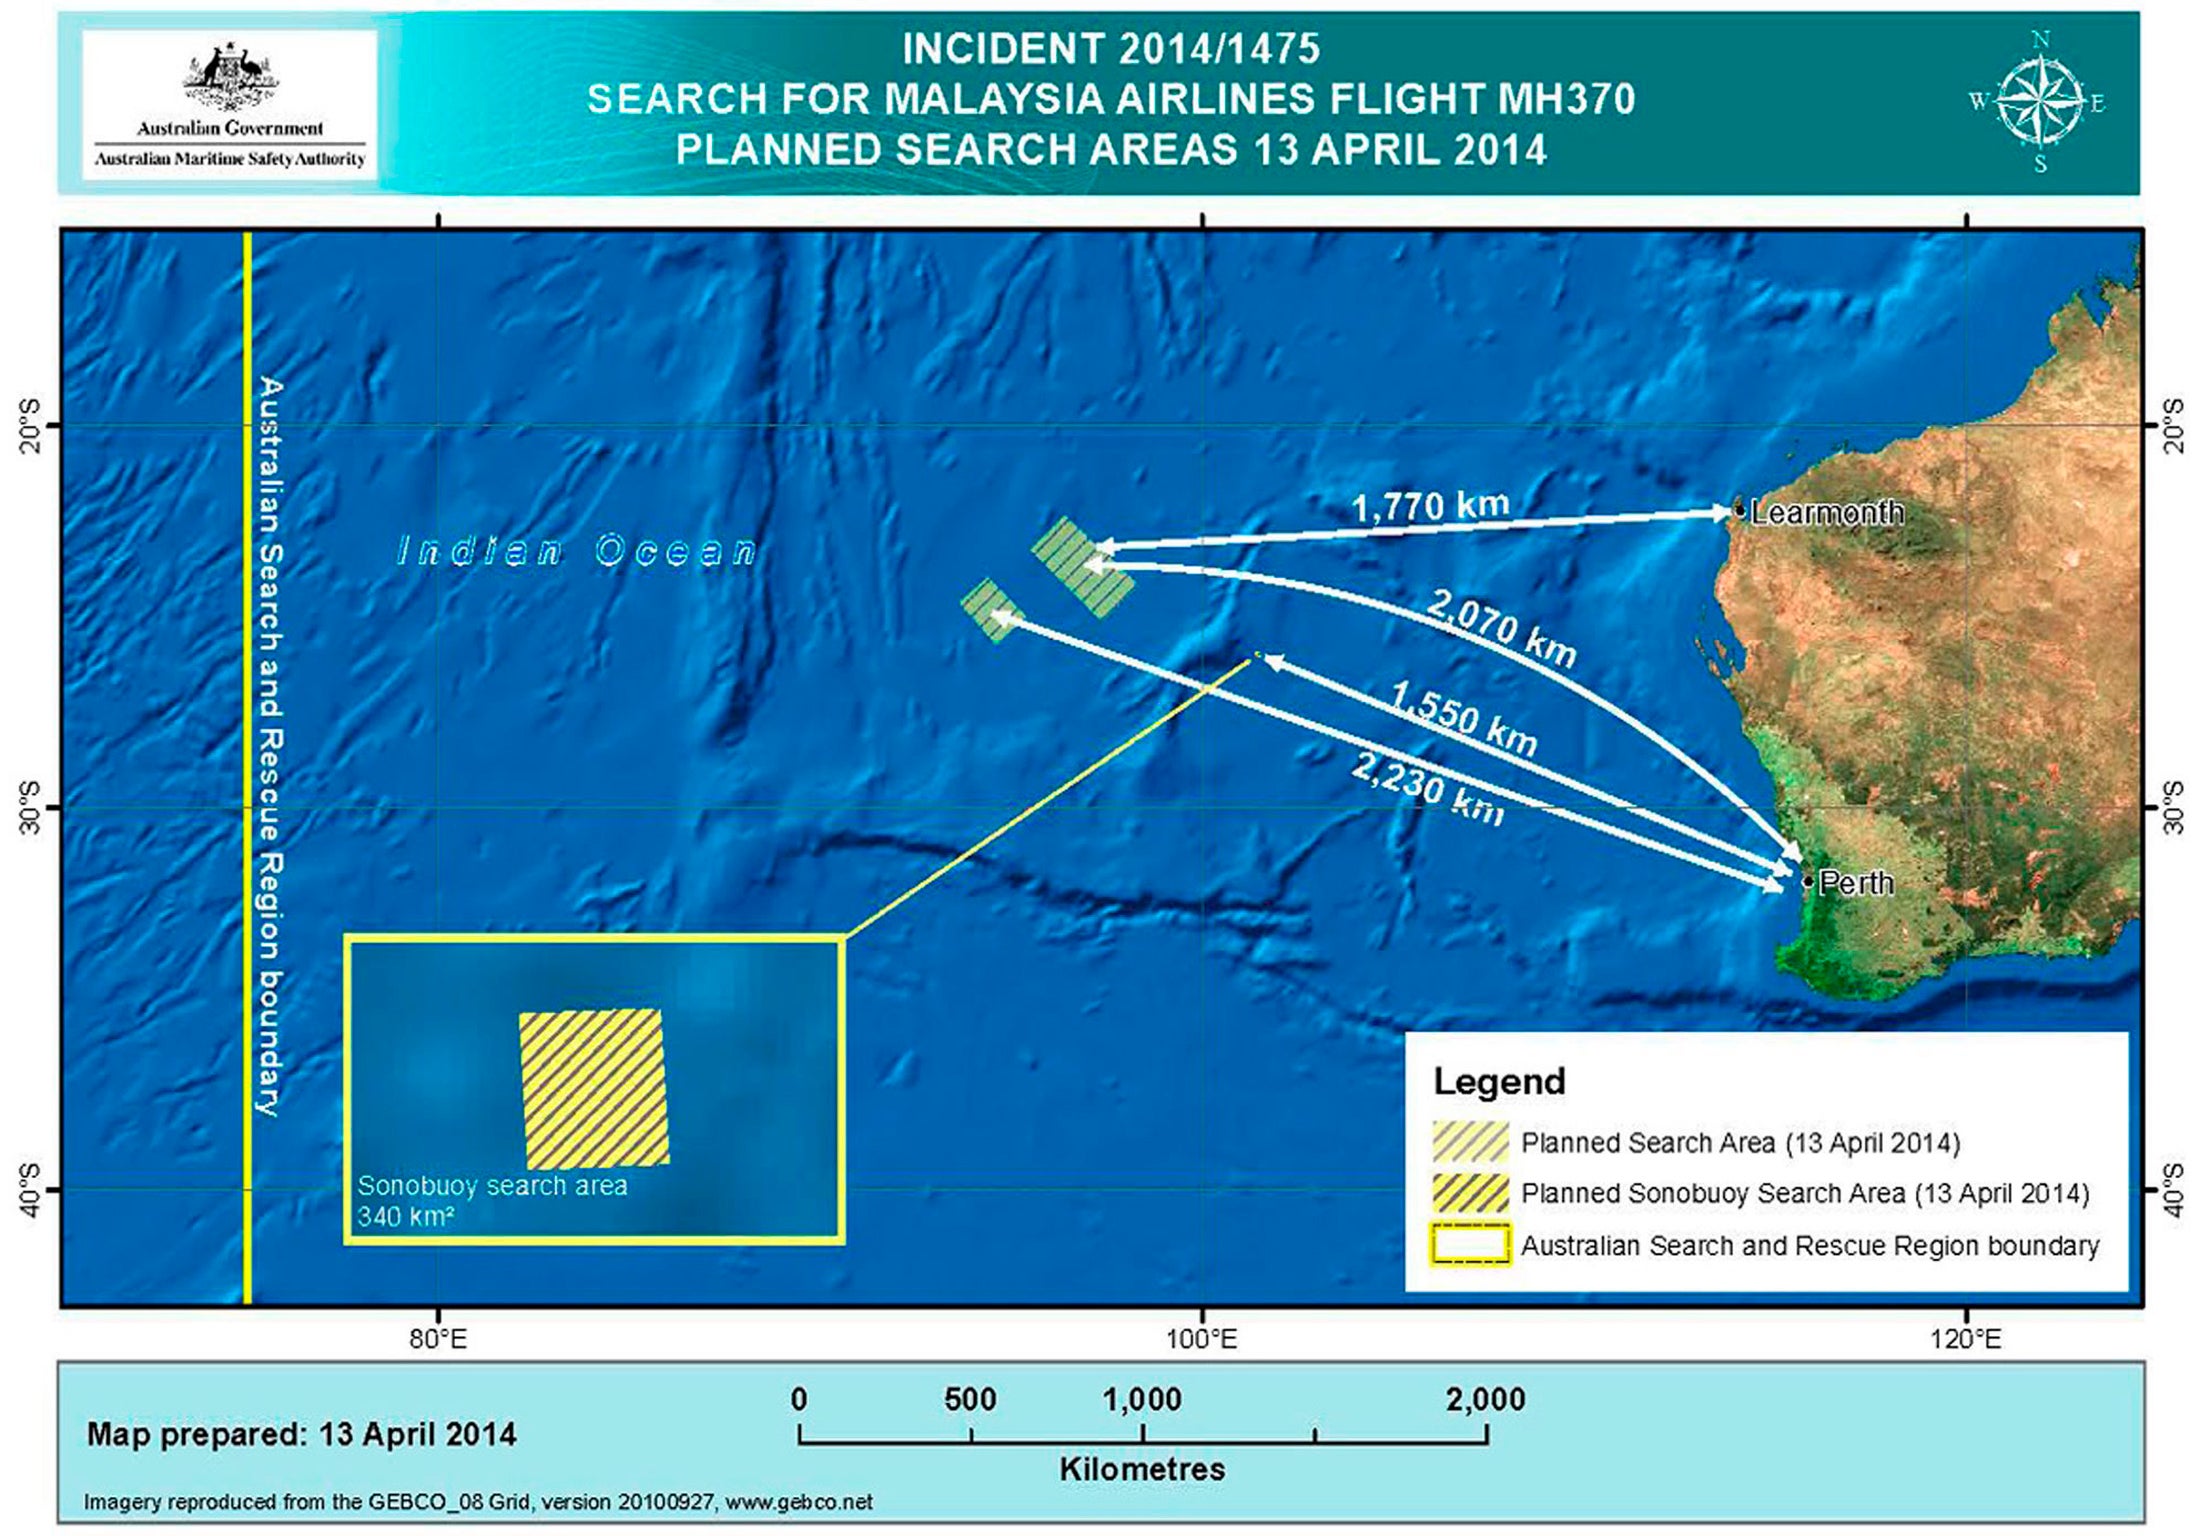 Australian Maritime Safety Authority image showing the current planned search area in the Indian Ocean for the flight MH370 on 13 April 2014